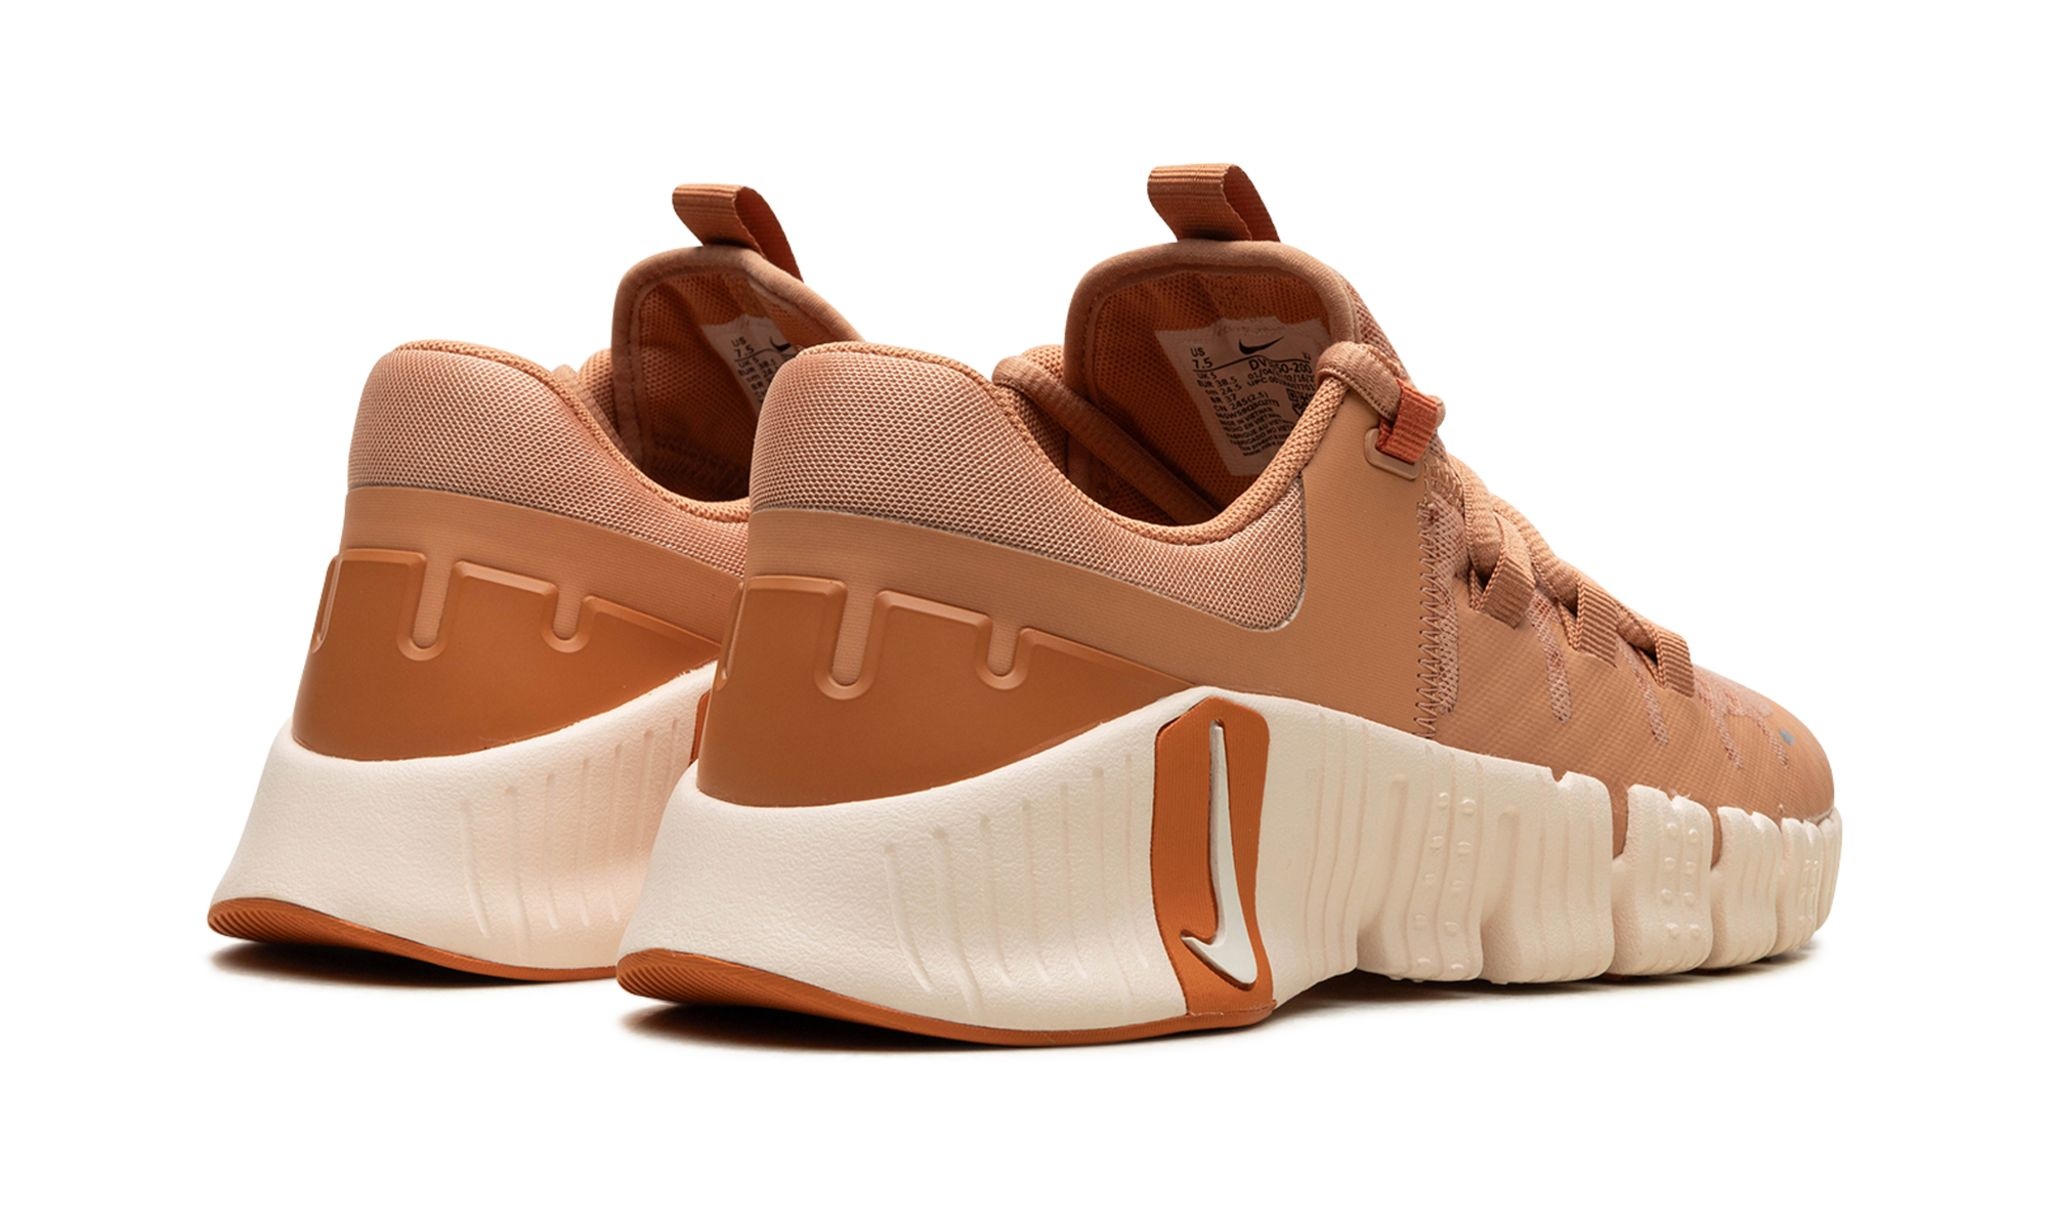 FREE METCON 5 WMNS "Amber Brown" - 3